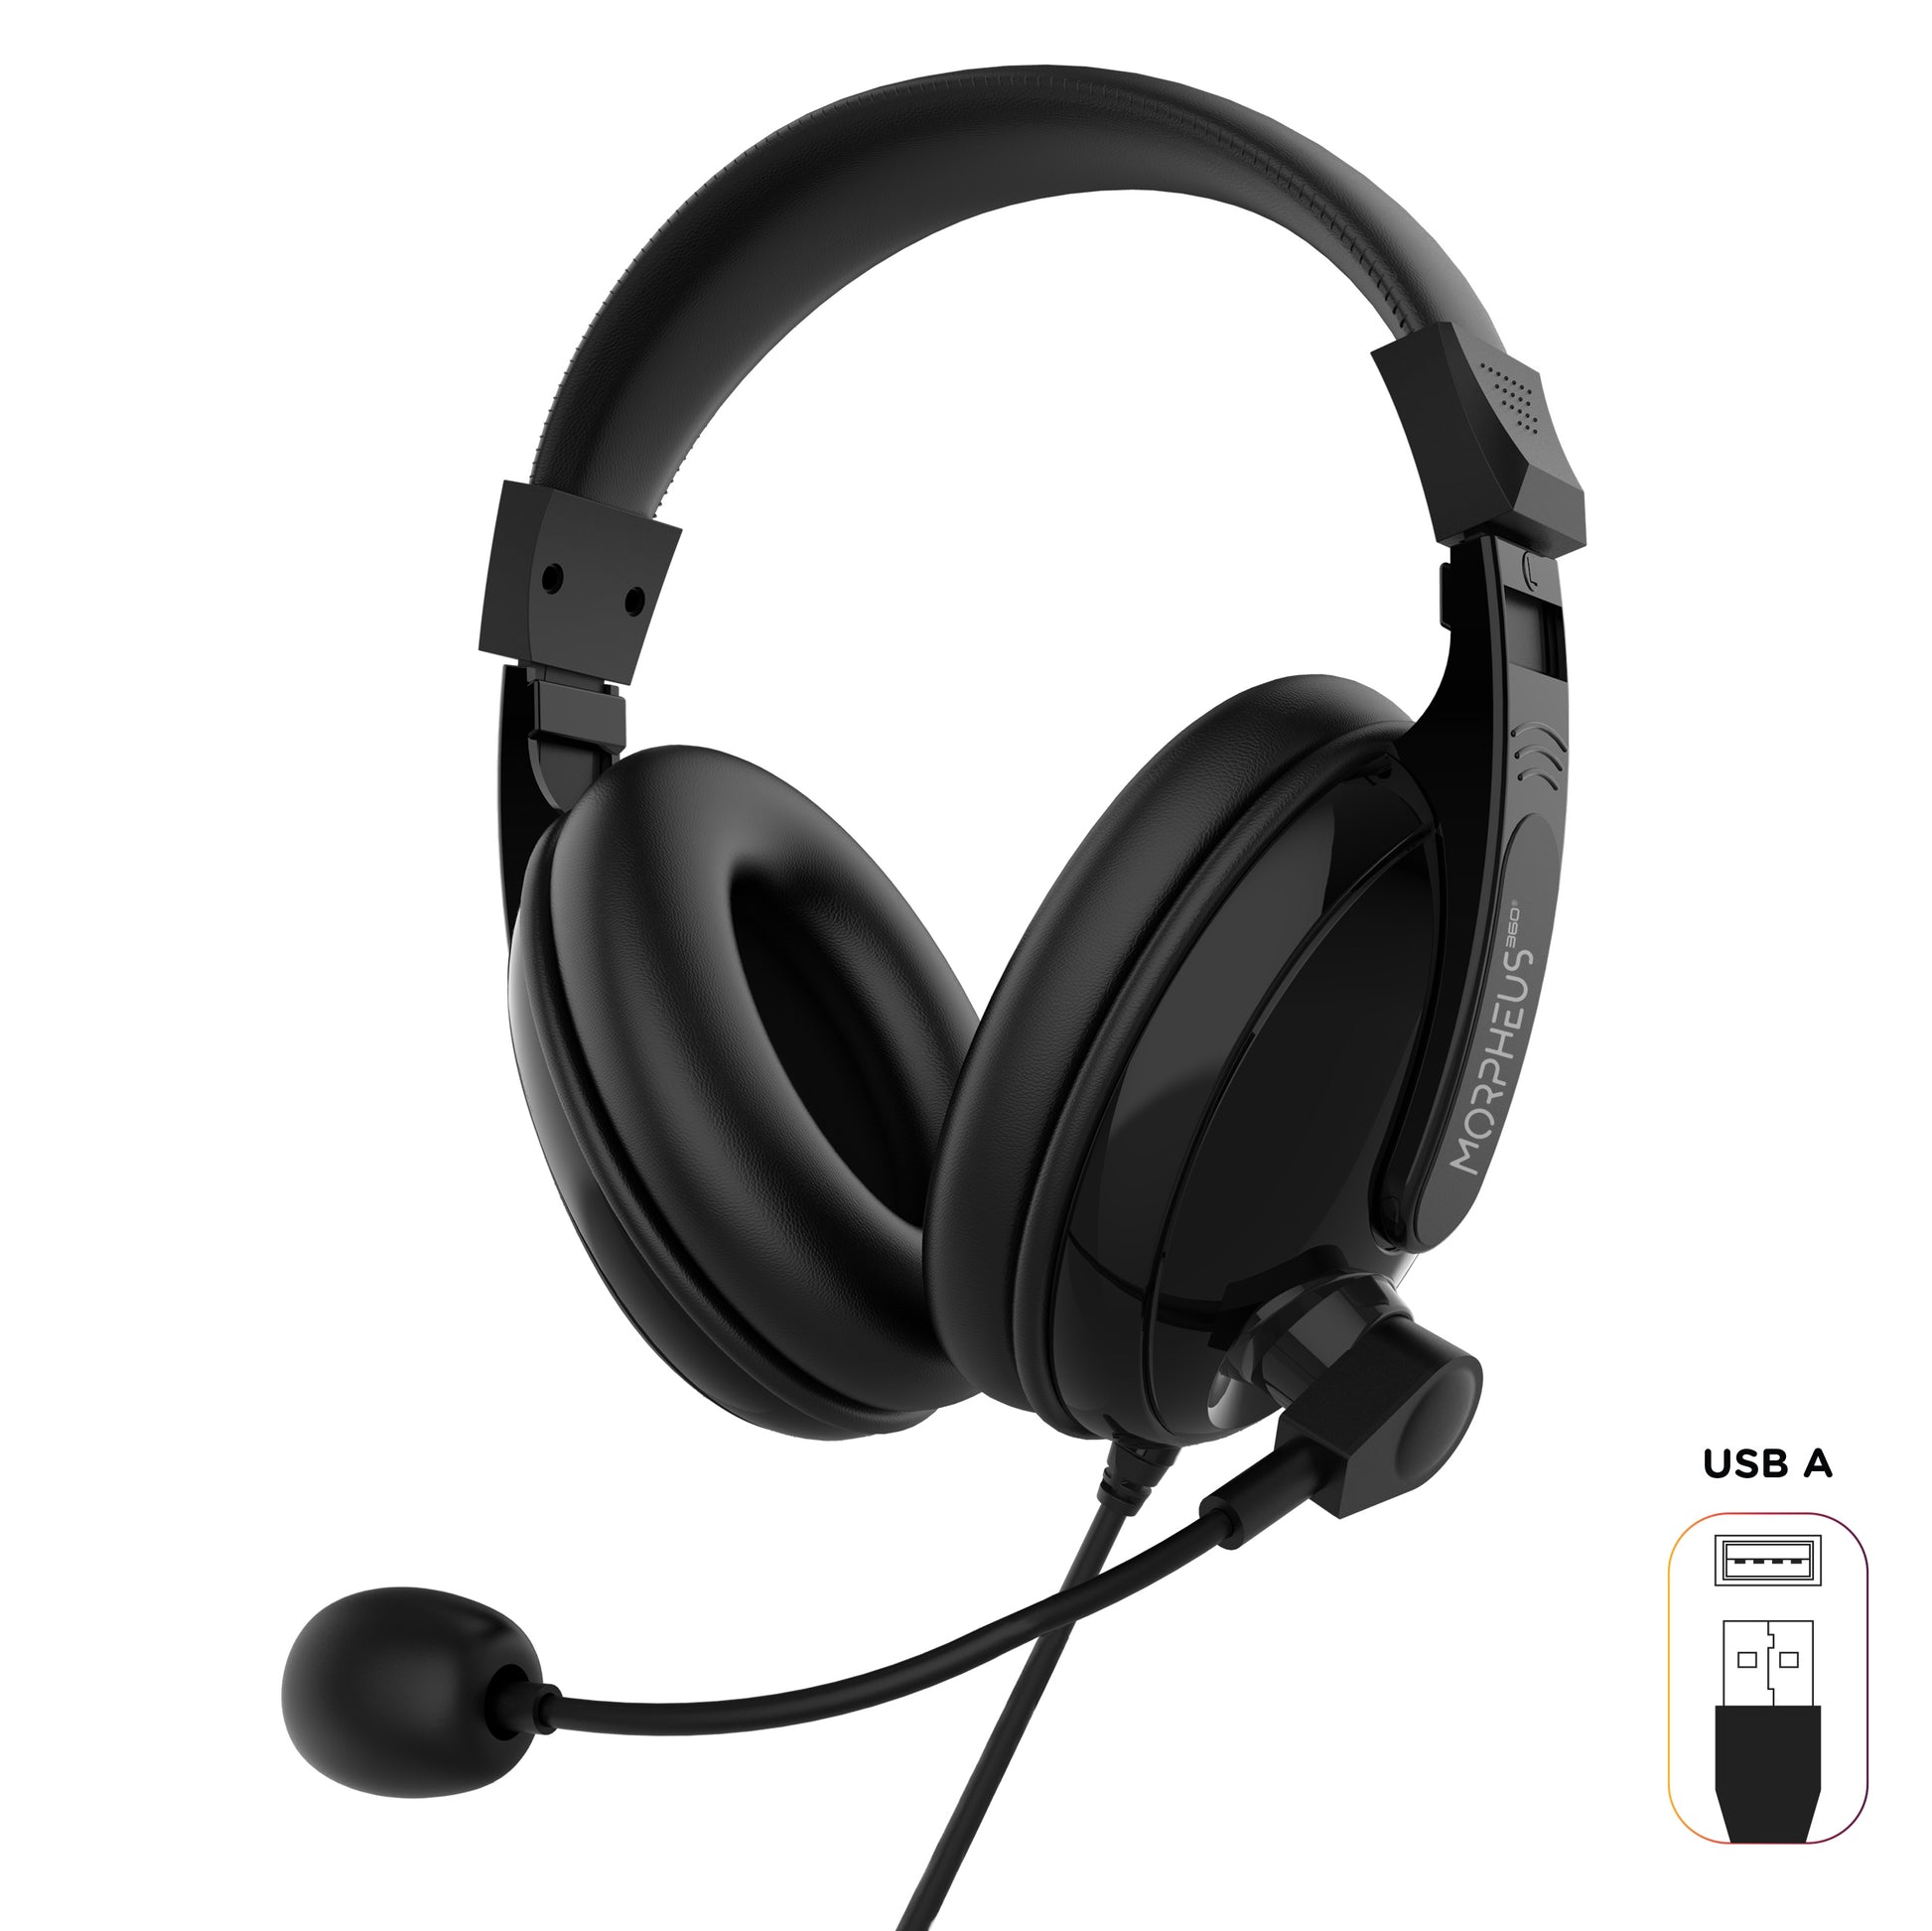 Front view of the Deluxe MM Headset with Boom Microphone.  Inset photo shows USB A Connector to connect to a PC/Mac, Tablet, Phone or computer.